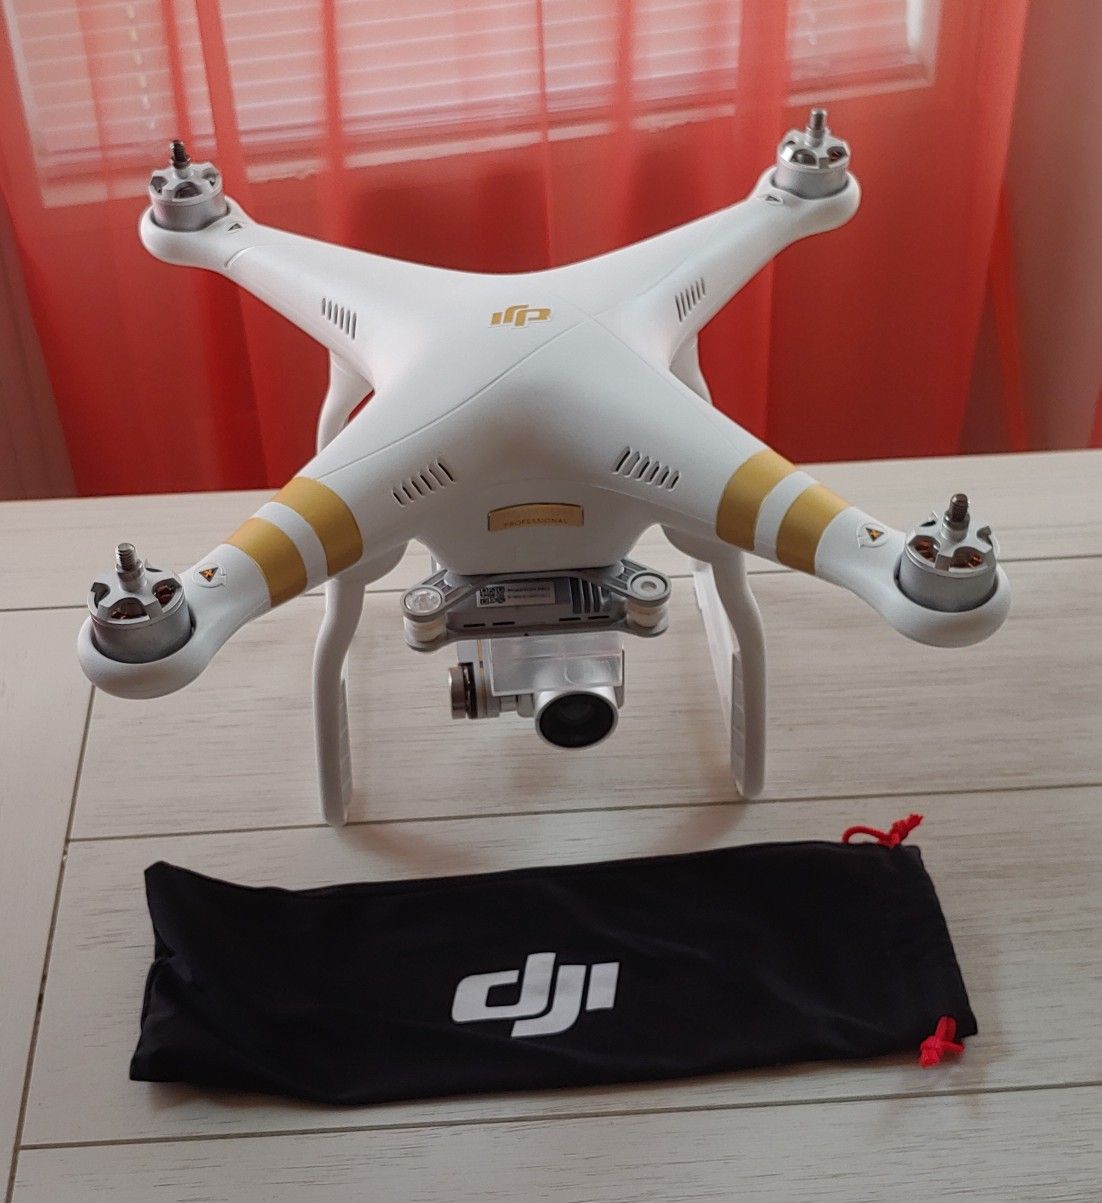 DJI Phantom 3 Professional with 2 batteries + charger + remote control + bag. Working Great!